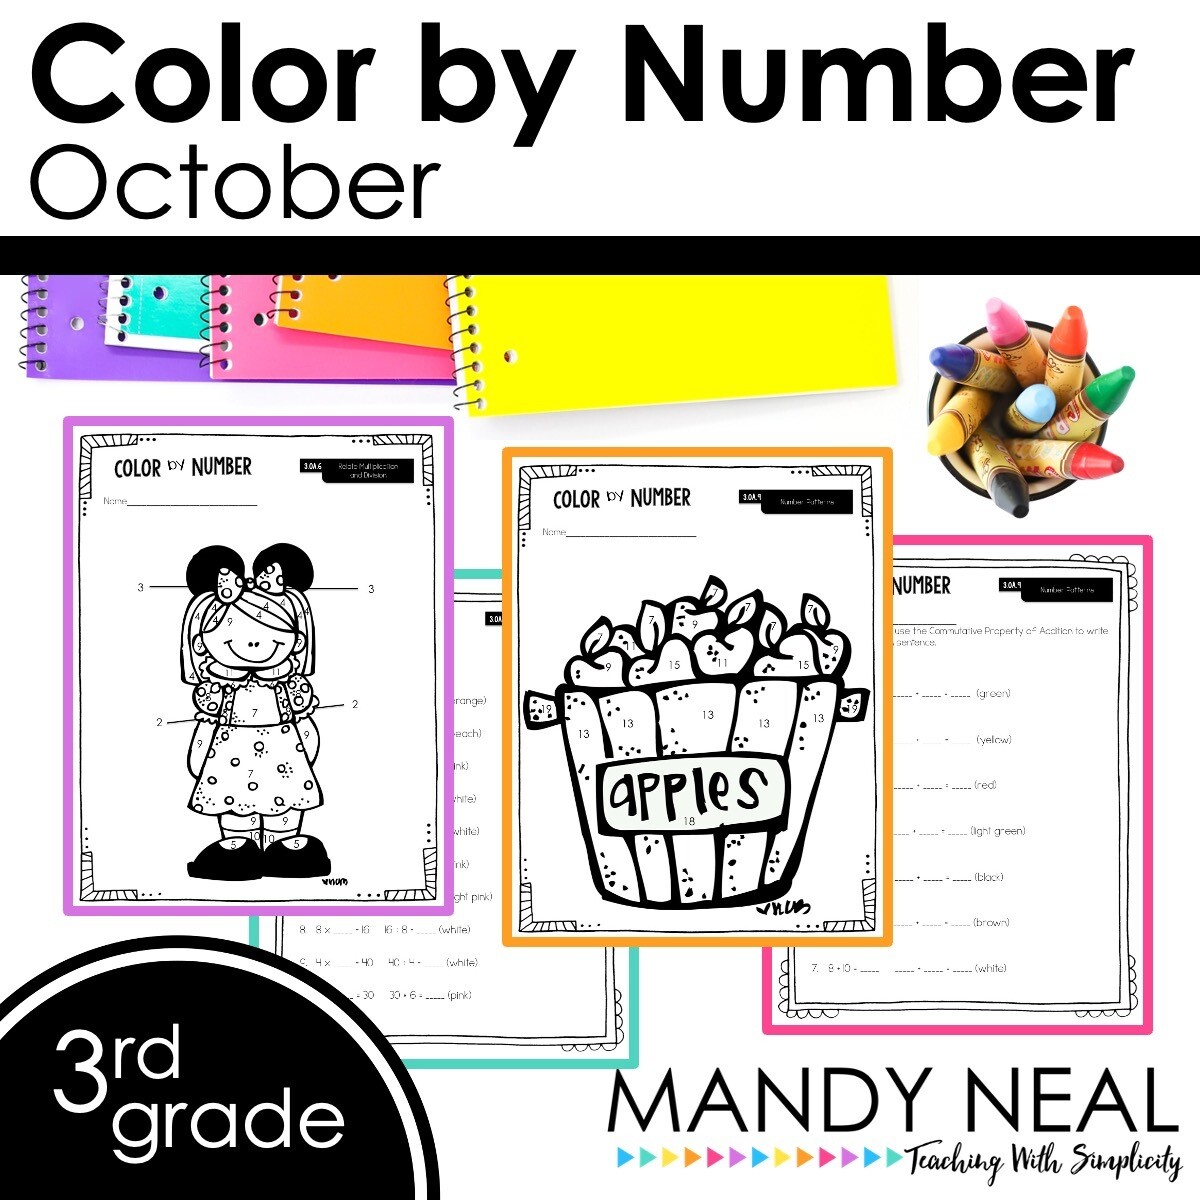 October Color By Number for 3rd Grade Math